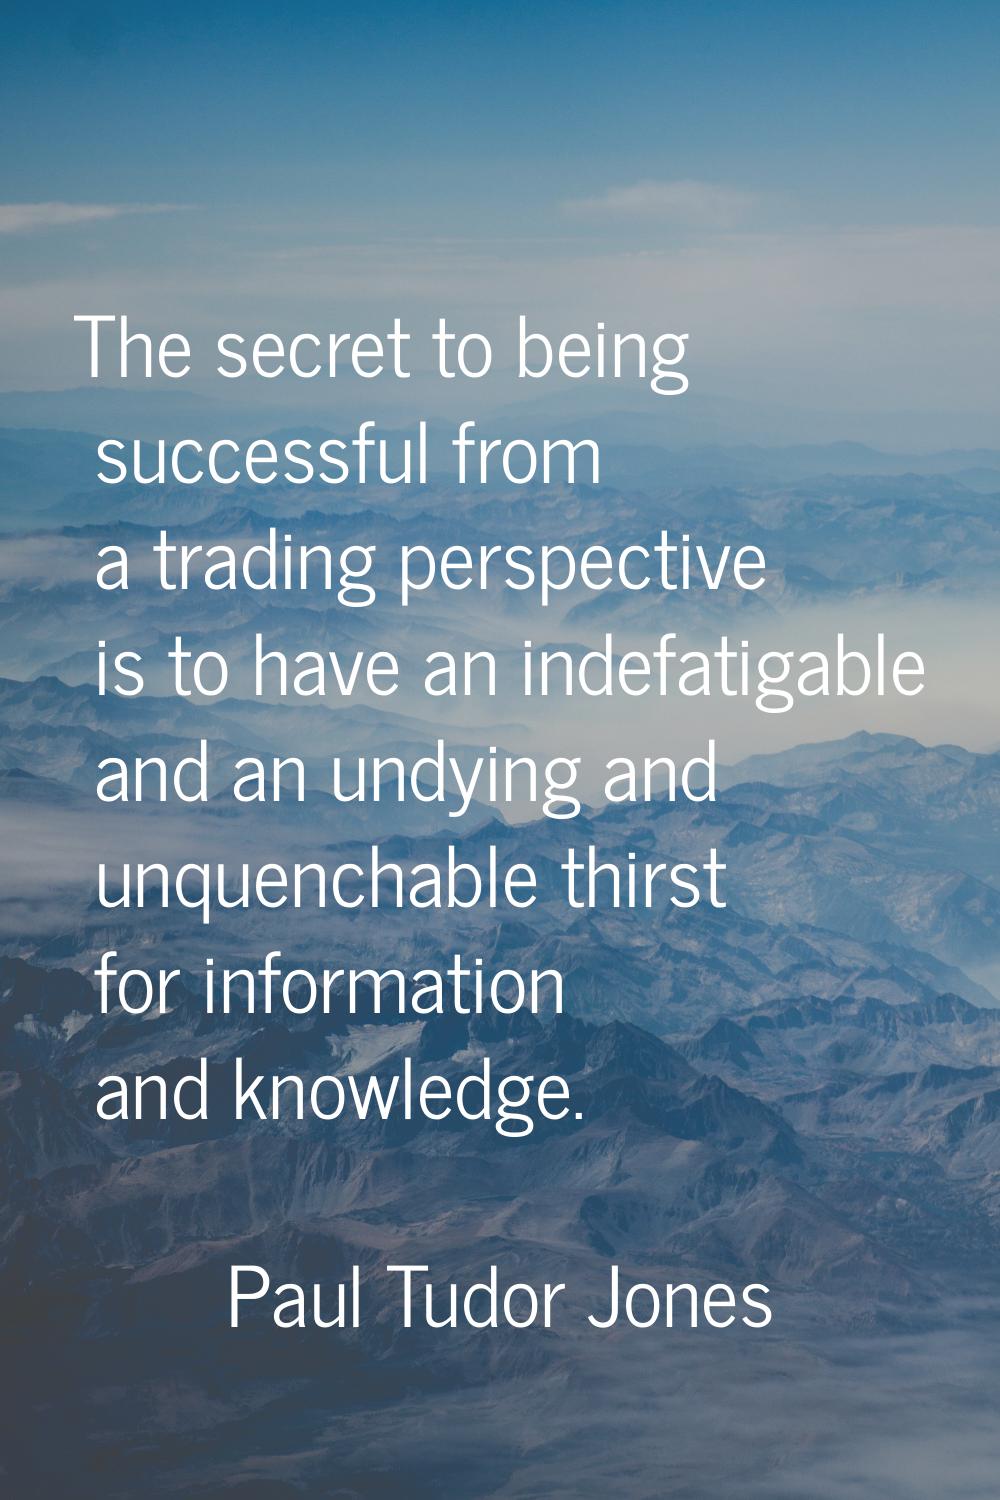 The secret to being successful from a trading perspective is to have an indefatigable and an undyin